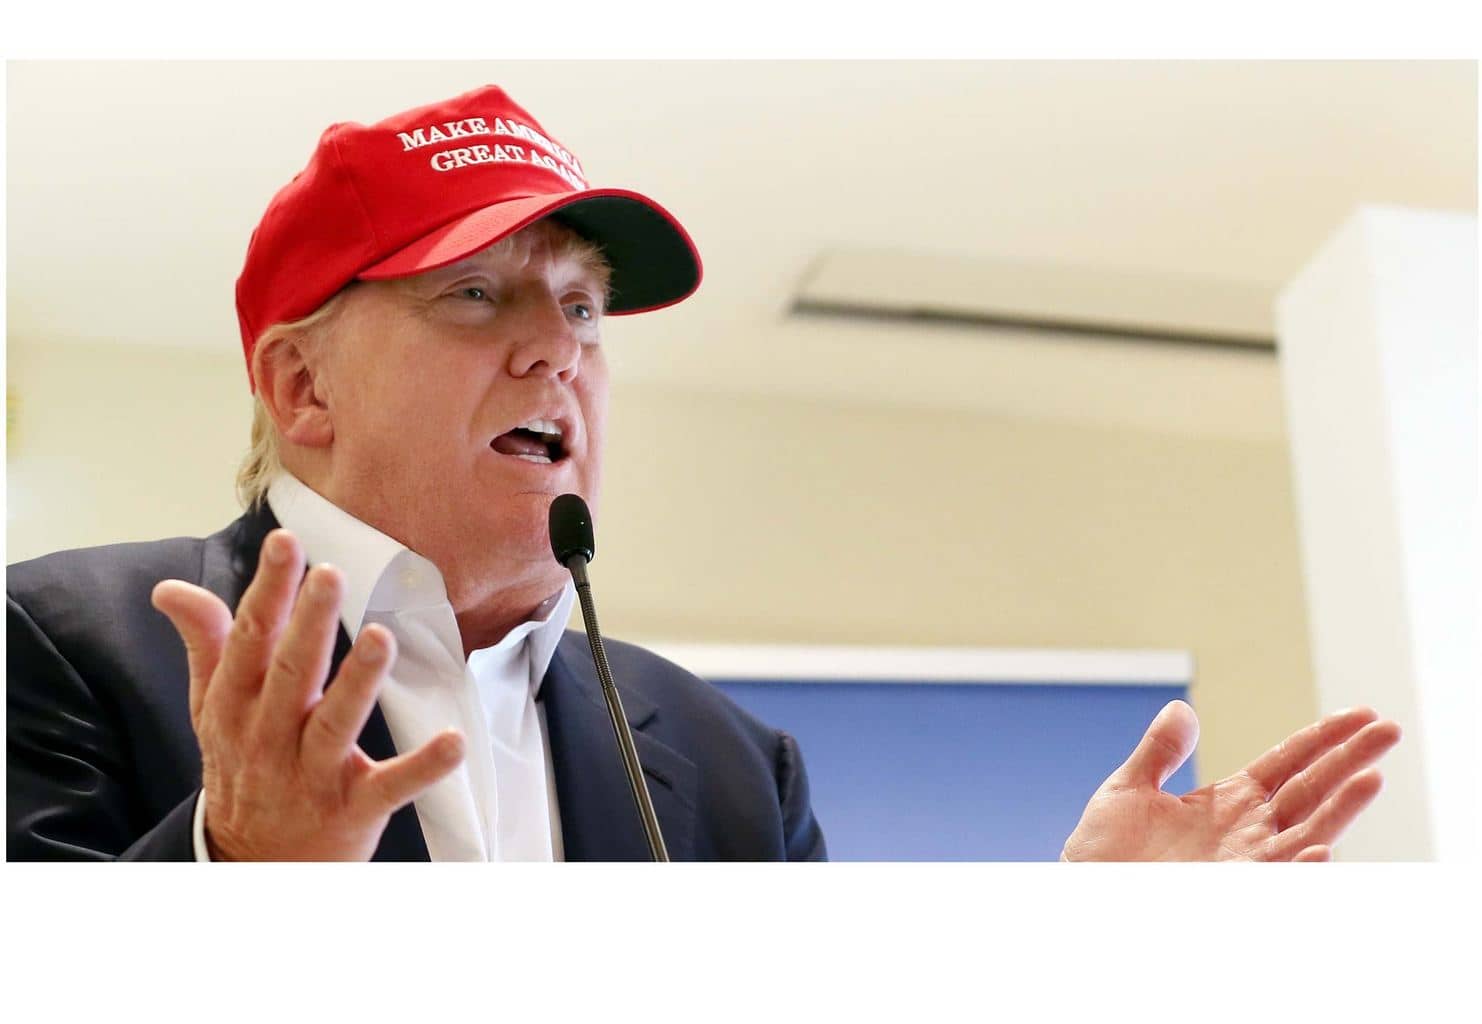 Trump wears red hat campaign